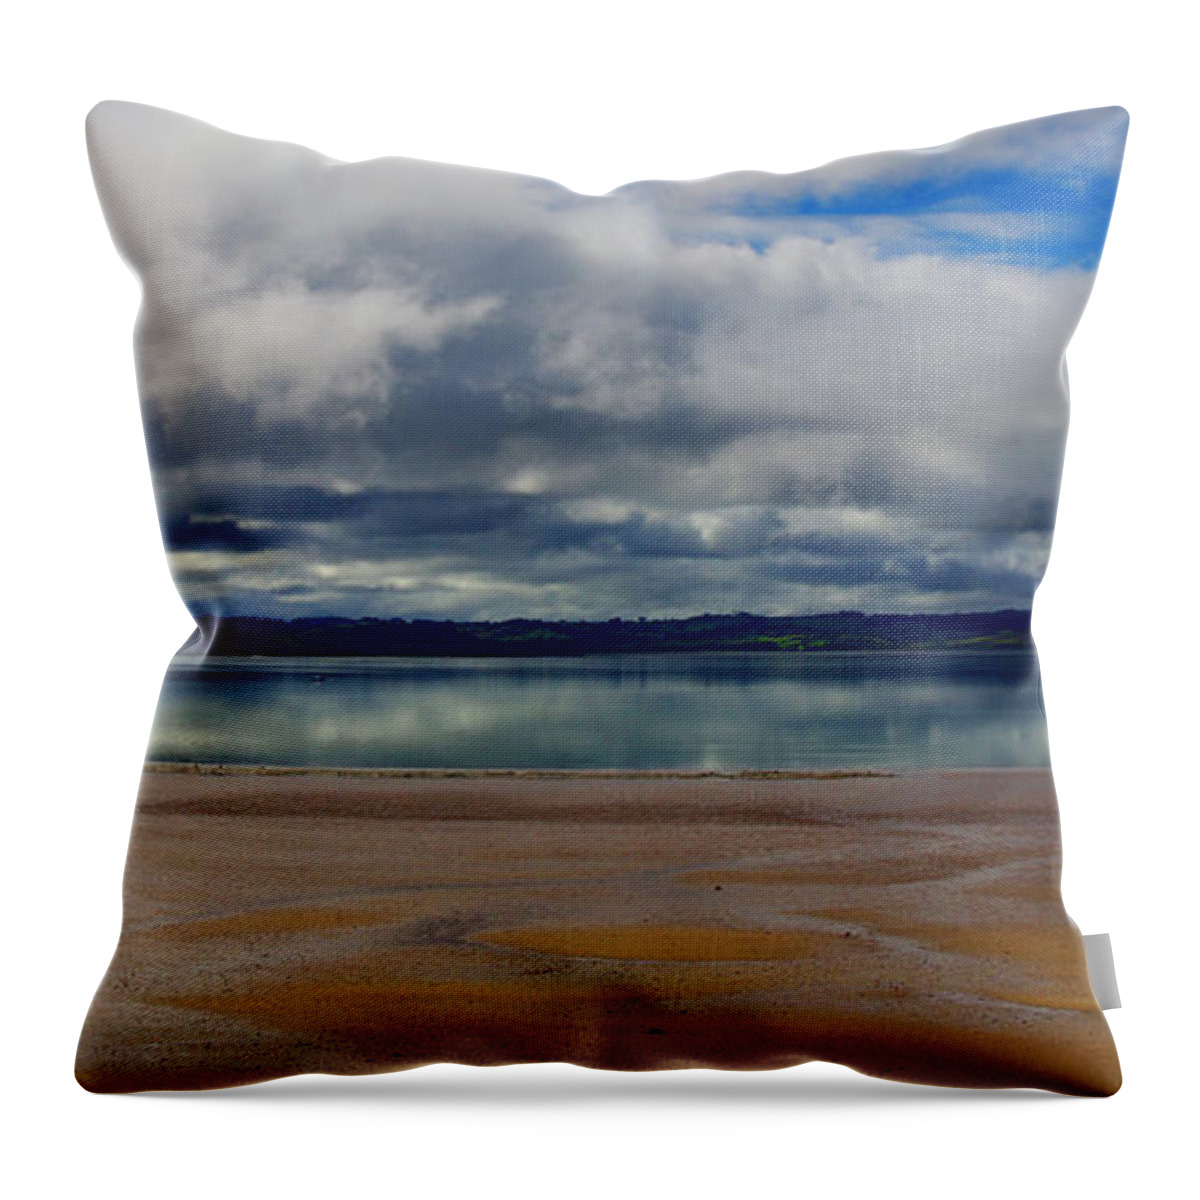 Clouds Throw Pillow featuring the photograph Morning Reflections on the Water - Shelly Beach, New Zealand by Kenneth Lane Smith